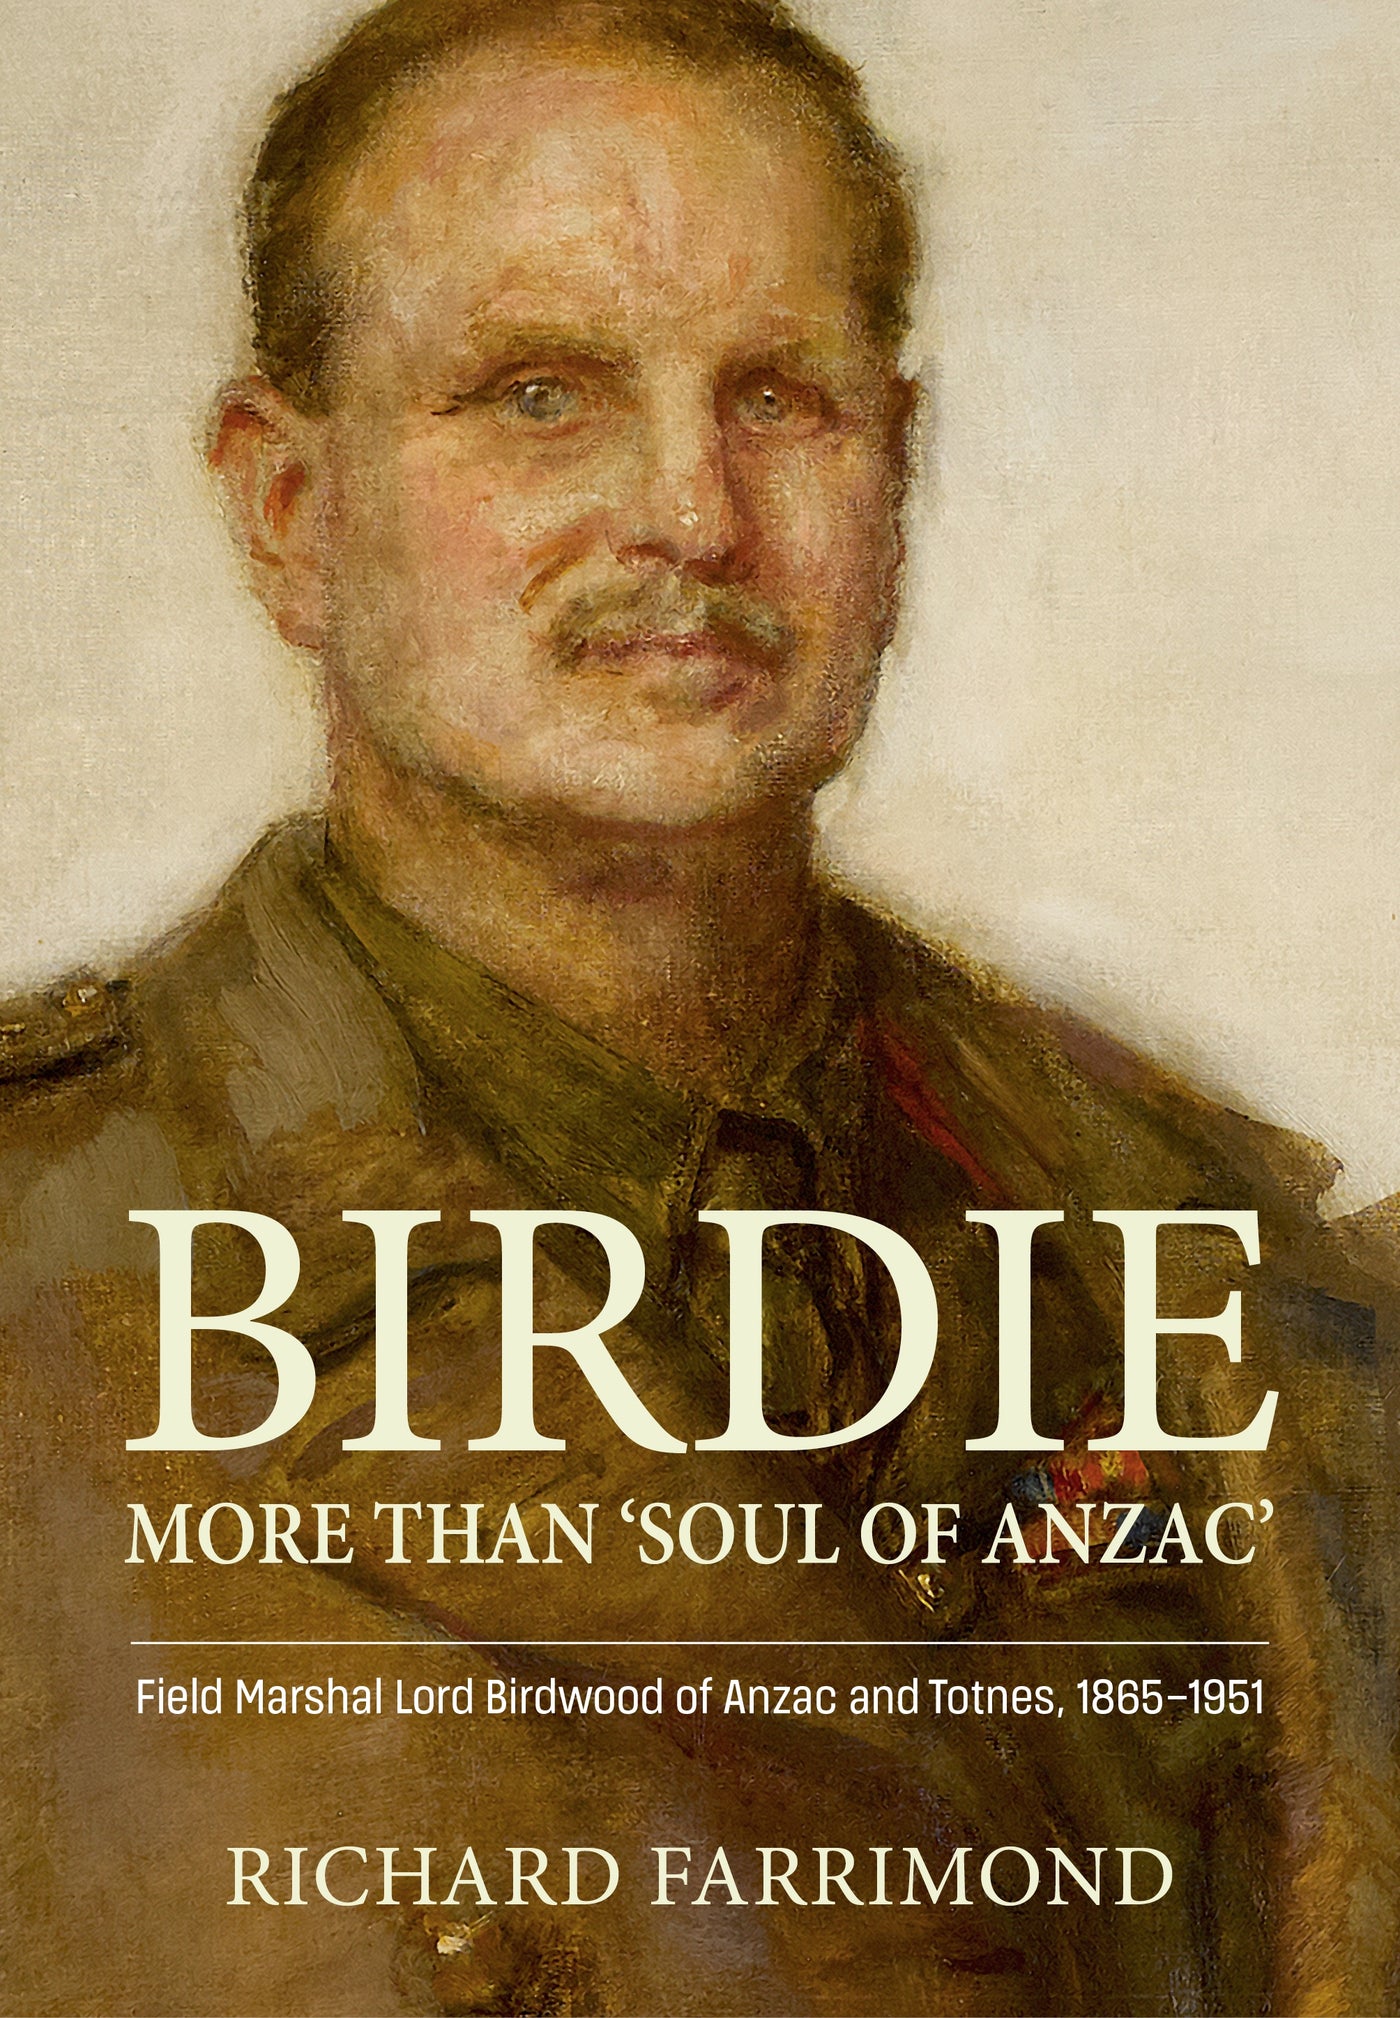 Birdie – More Than ’Soul of Anzac’